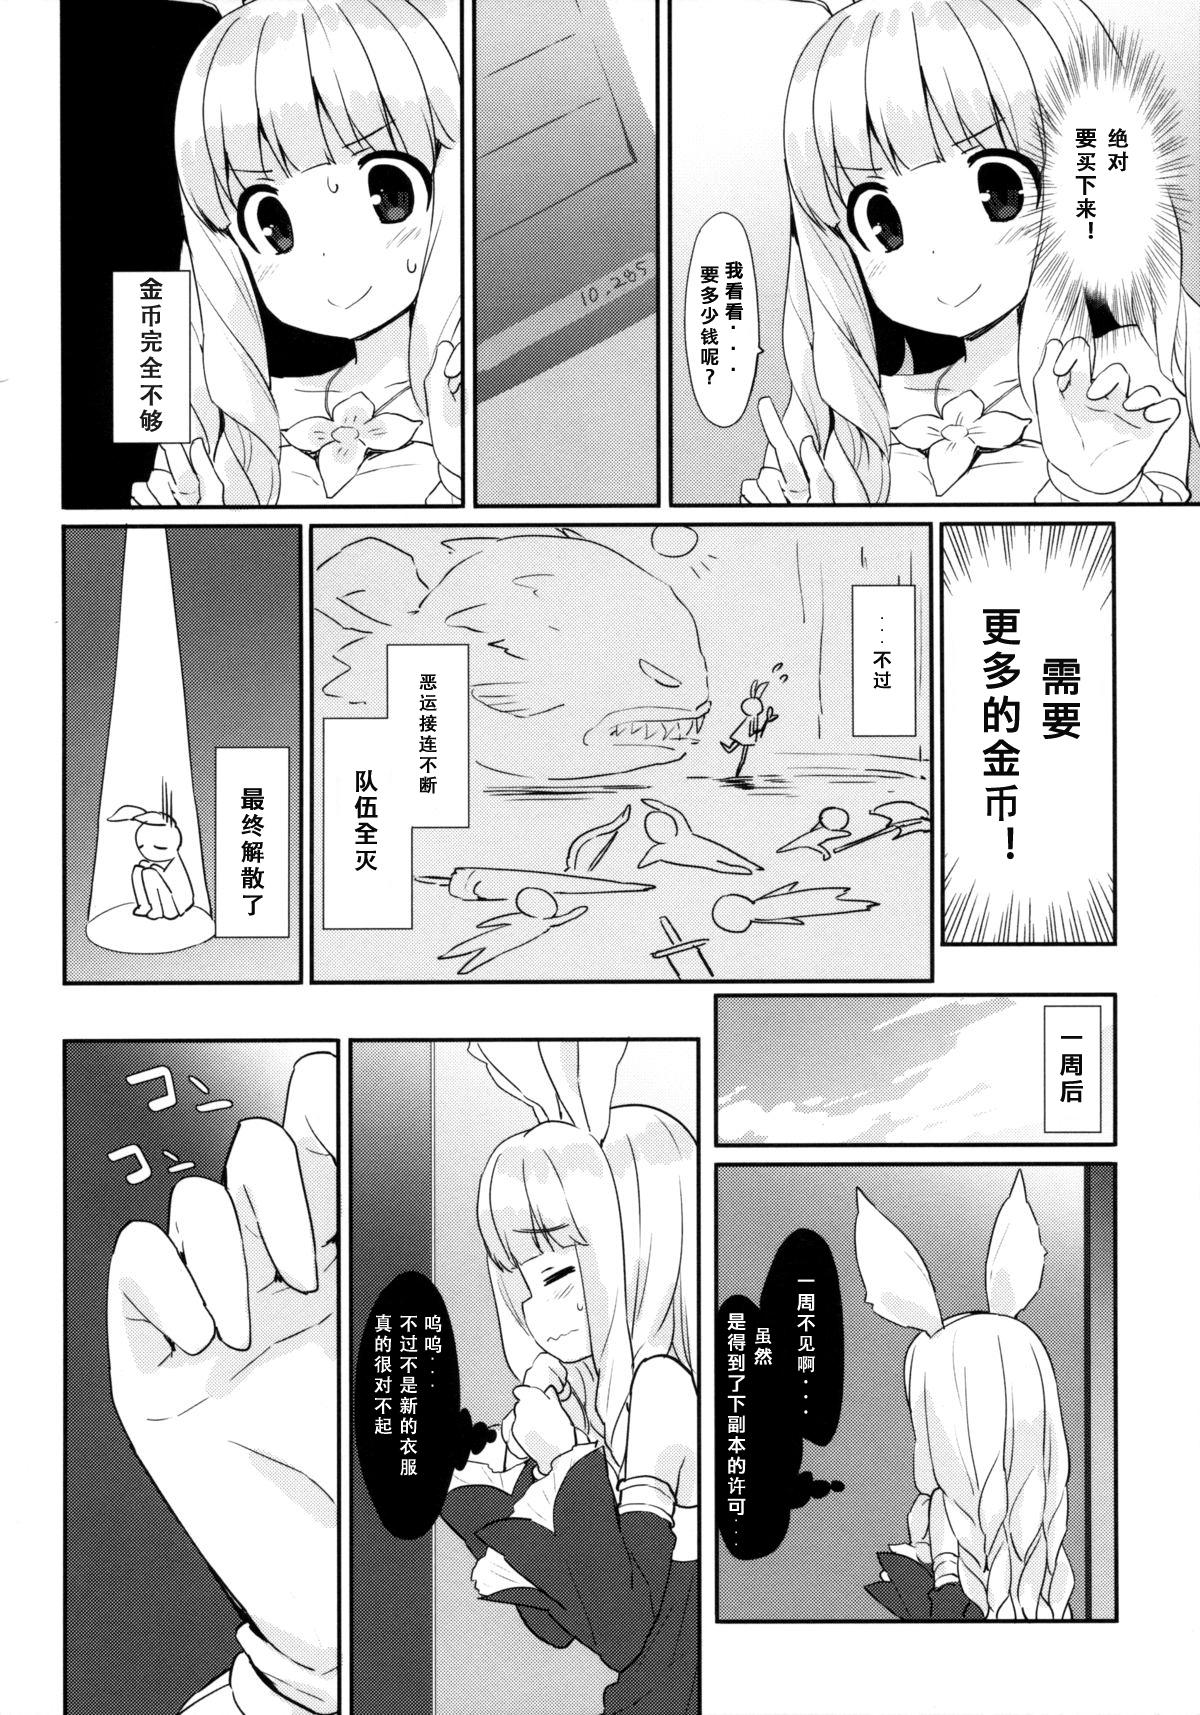 Vecina Puni Purin Elin-chan - Tera Style - Page 6